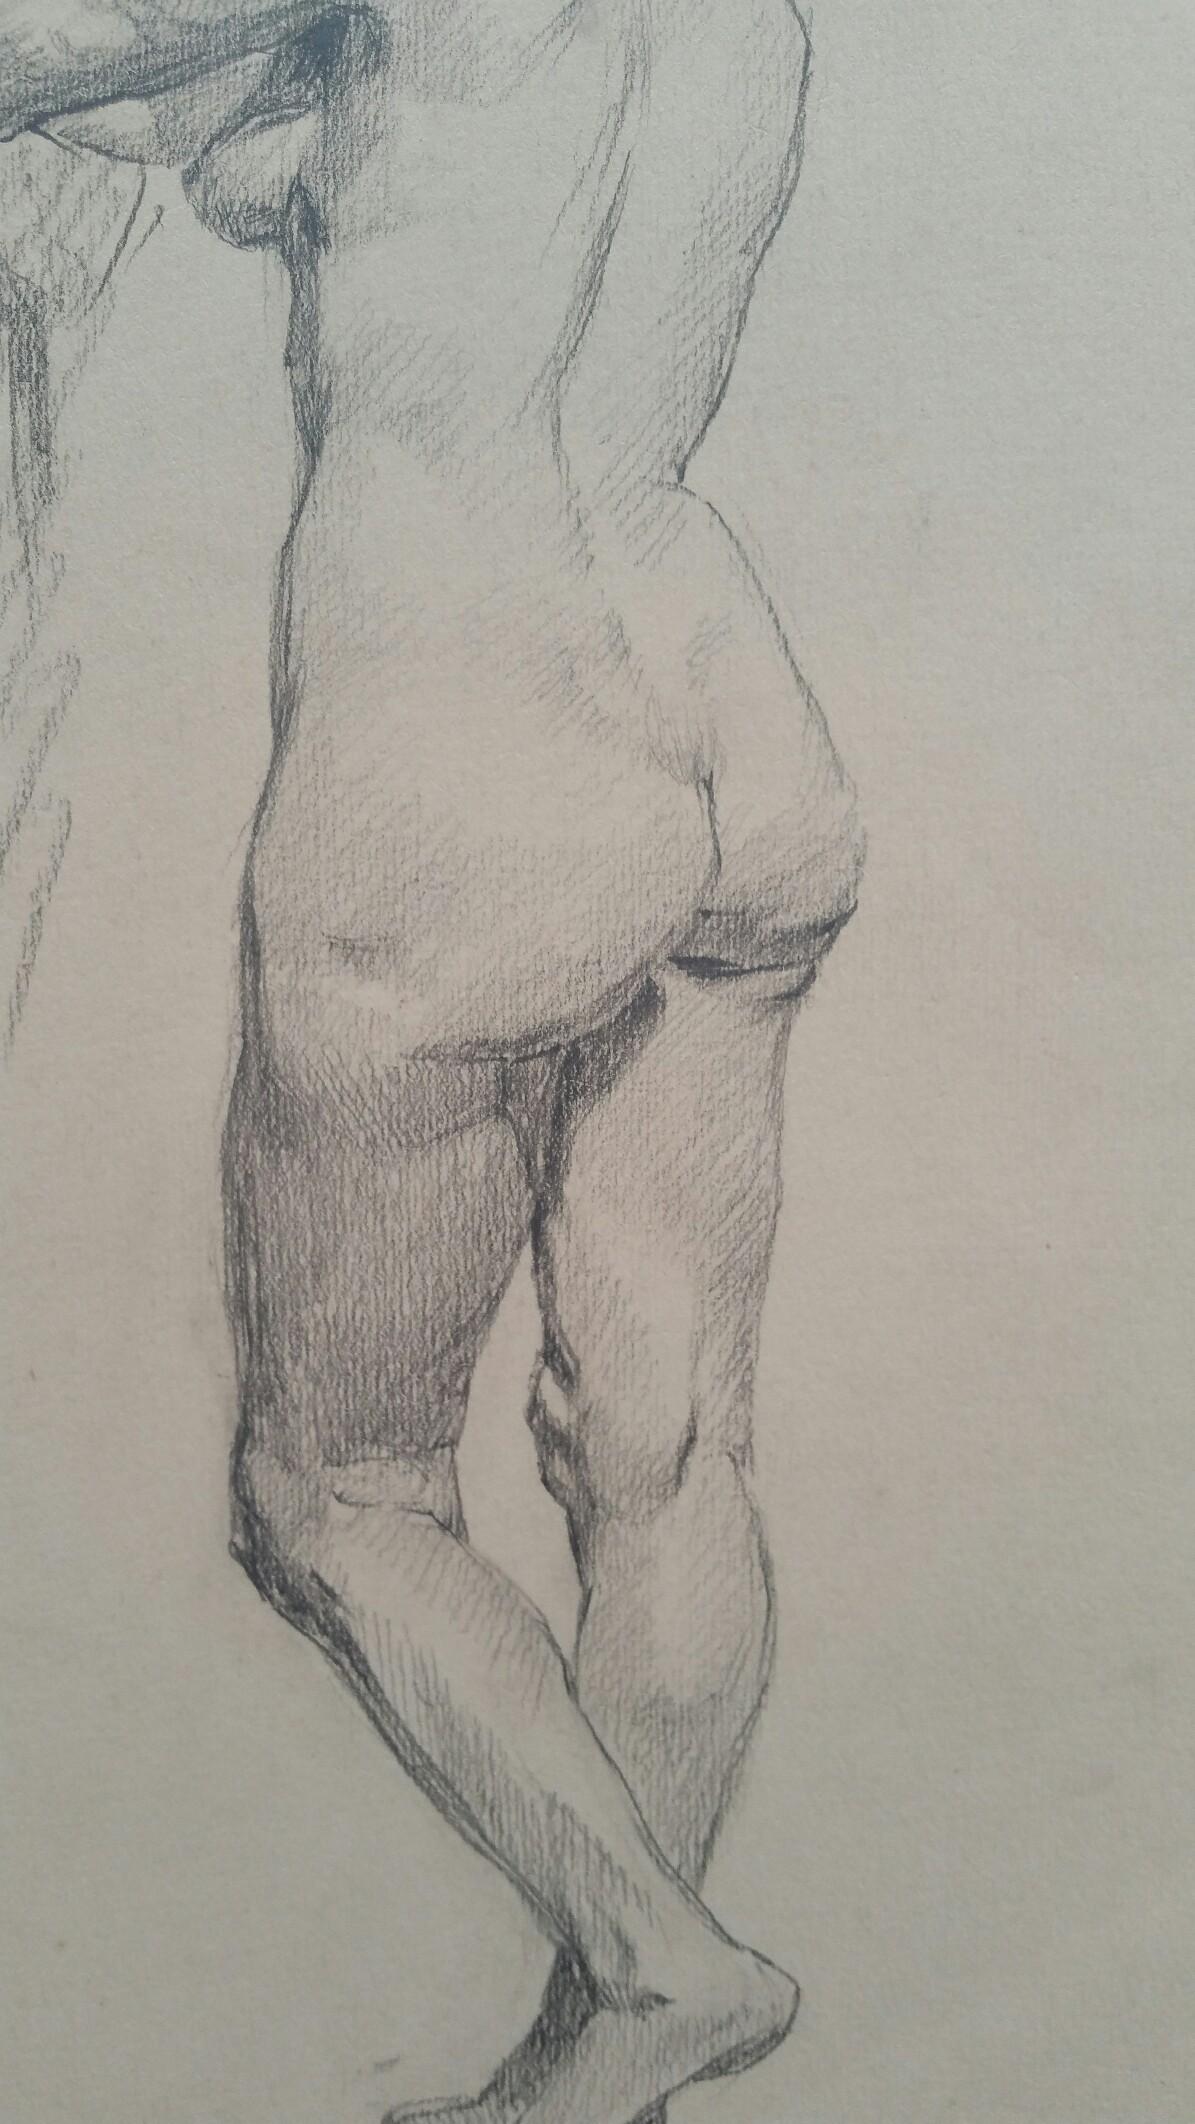 English Graphite Sketch of a Female Nude, Standing
by Henry George Moon (British 1857-1905)
on off-white artists paper, unframed
measurements: sheet 14.5 x 11 inches 

provenance: from the artists estate

Condition report: pin holes to corners where